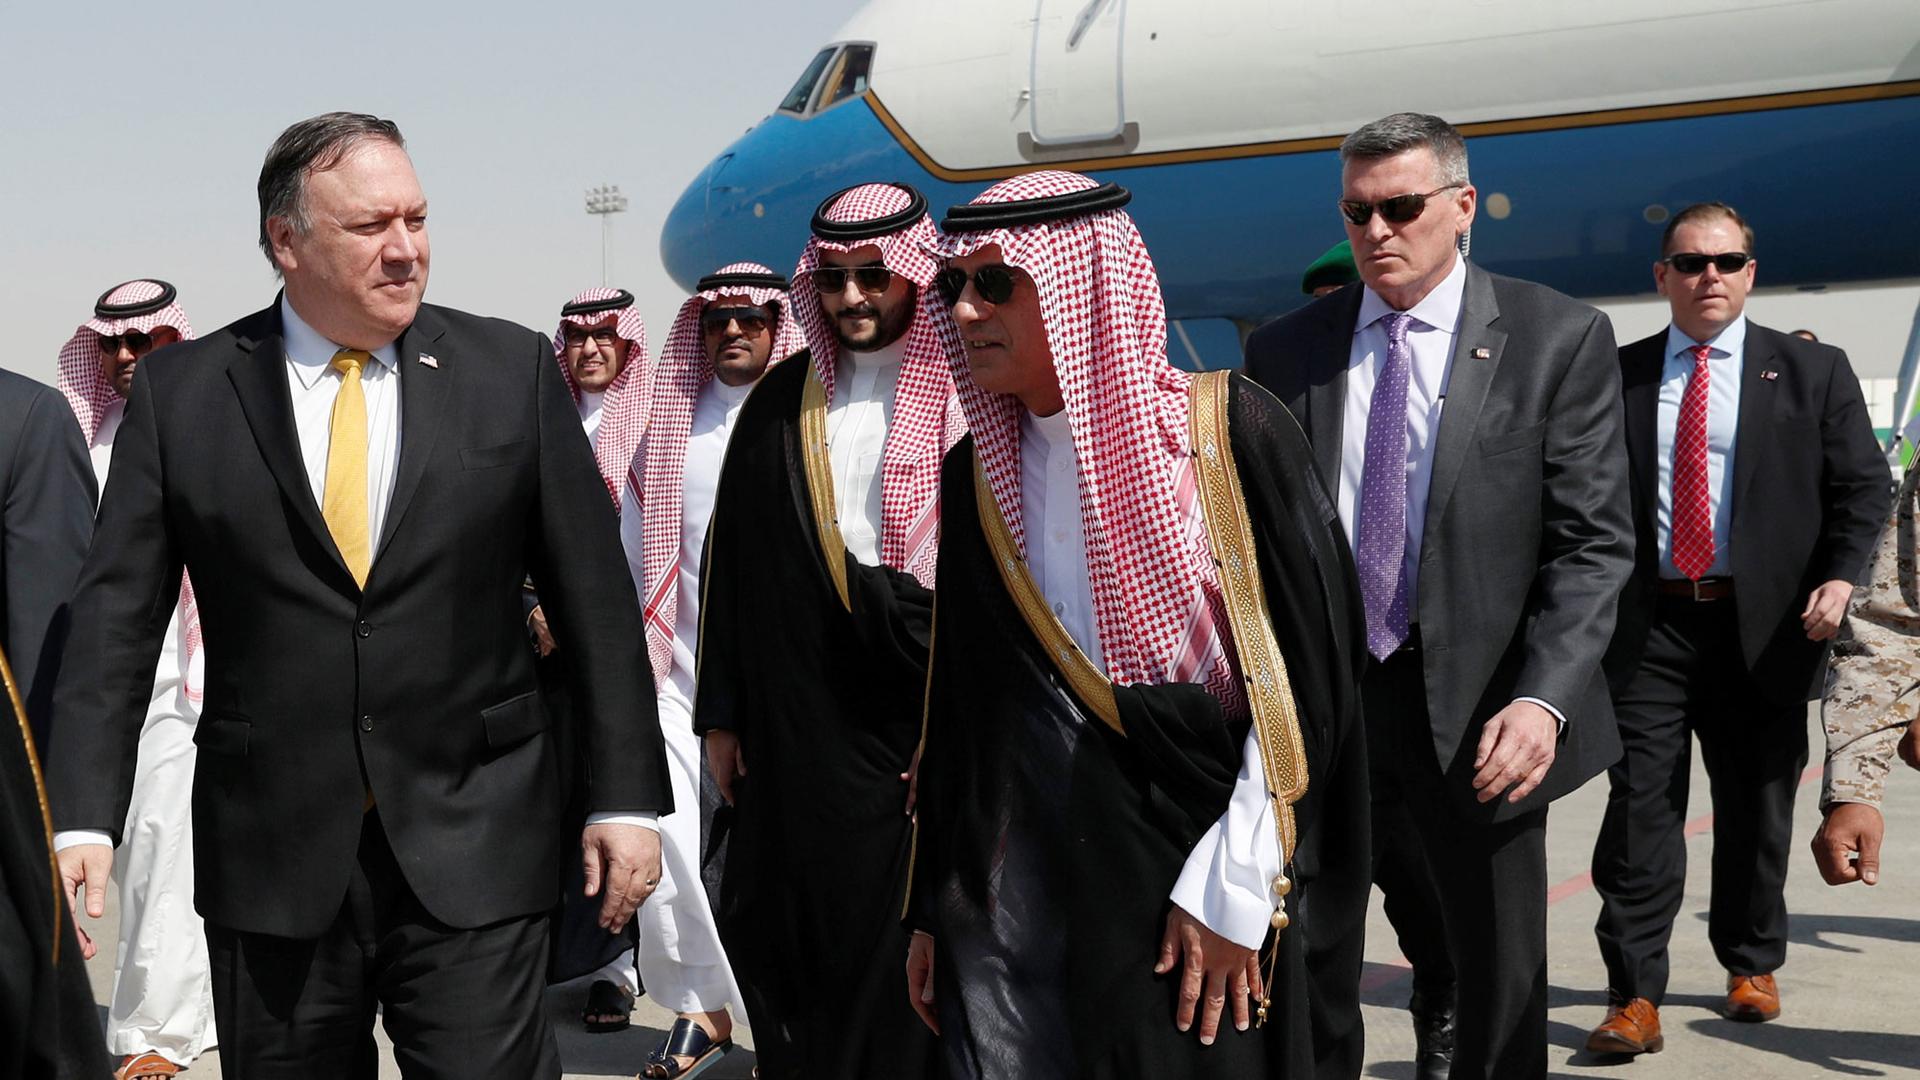 US Secretary of State Mike Pompeo is shown walking with Saudi Foreign Minister Adel al-Jubeir on the tarmac after arriving in Riyadh, Saudi Arabia,.